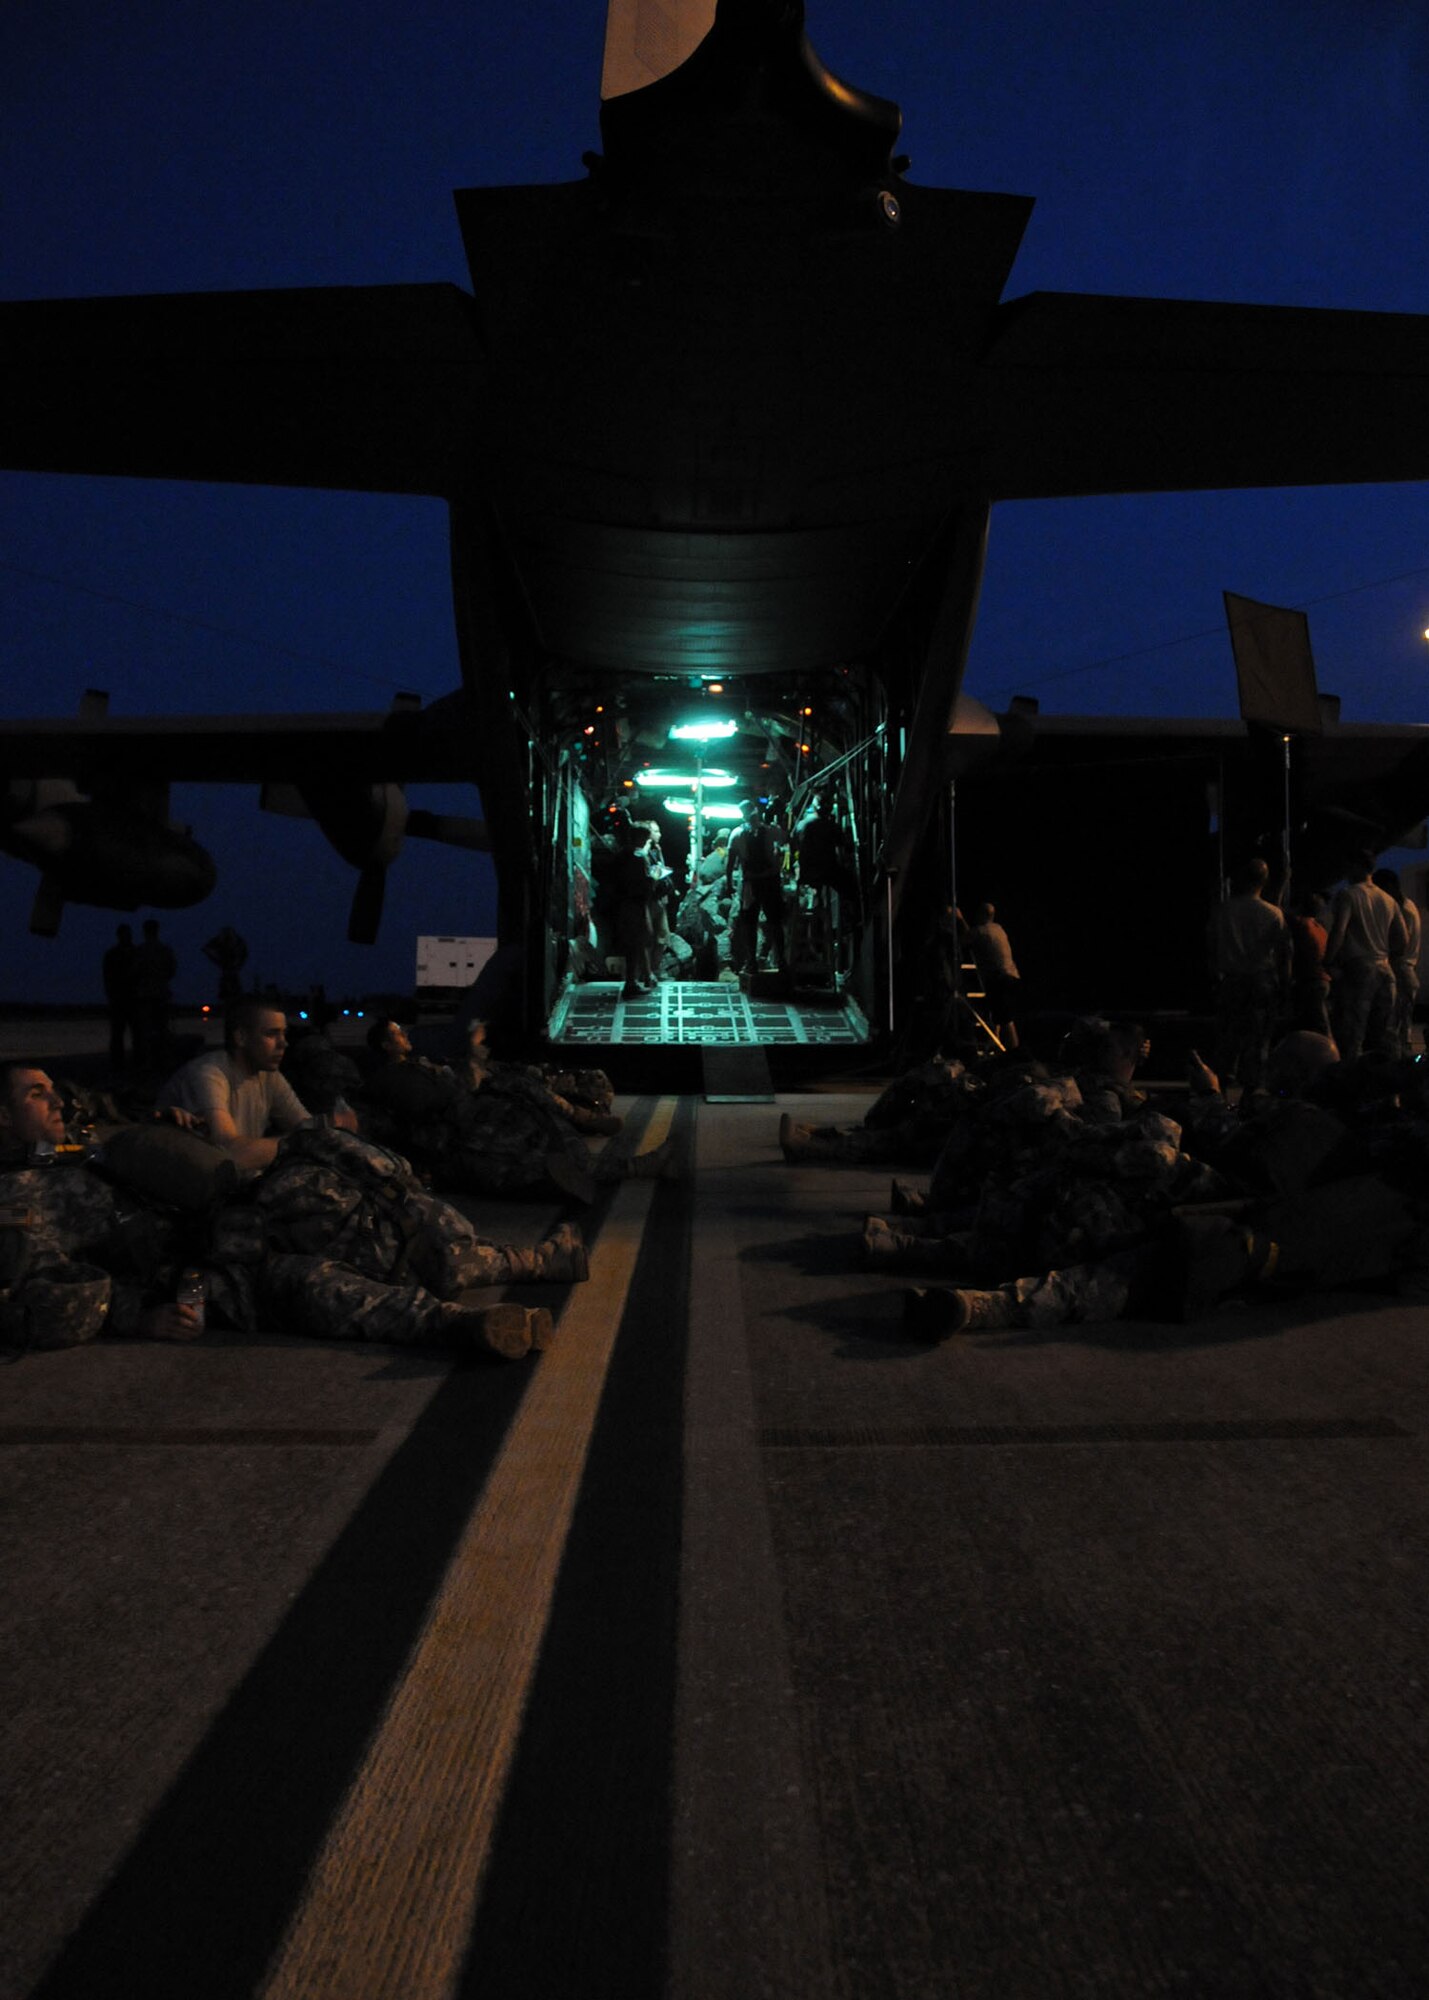 Army privates, students awaiting training at the U.S. Army Airborne School, wait to board the aircraft for a simulated jump on the flight line at Duke Field, Fla., June 15. The production company, WILL Interactive, started work on a choose-your-own-adventure film for Department of Defense jumpmaster training at Fort Benning, Ga., with help from members from the U.S. Army Airborne School. However, when the crew needed a C-130 in portions of the video, the 919th Special Operations Wing offered to support the project at Duke Field June 13-15. (U.S. Air Force photo/Tech. Sgt. Cheryl Foster)